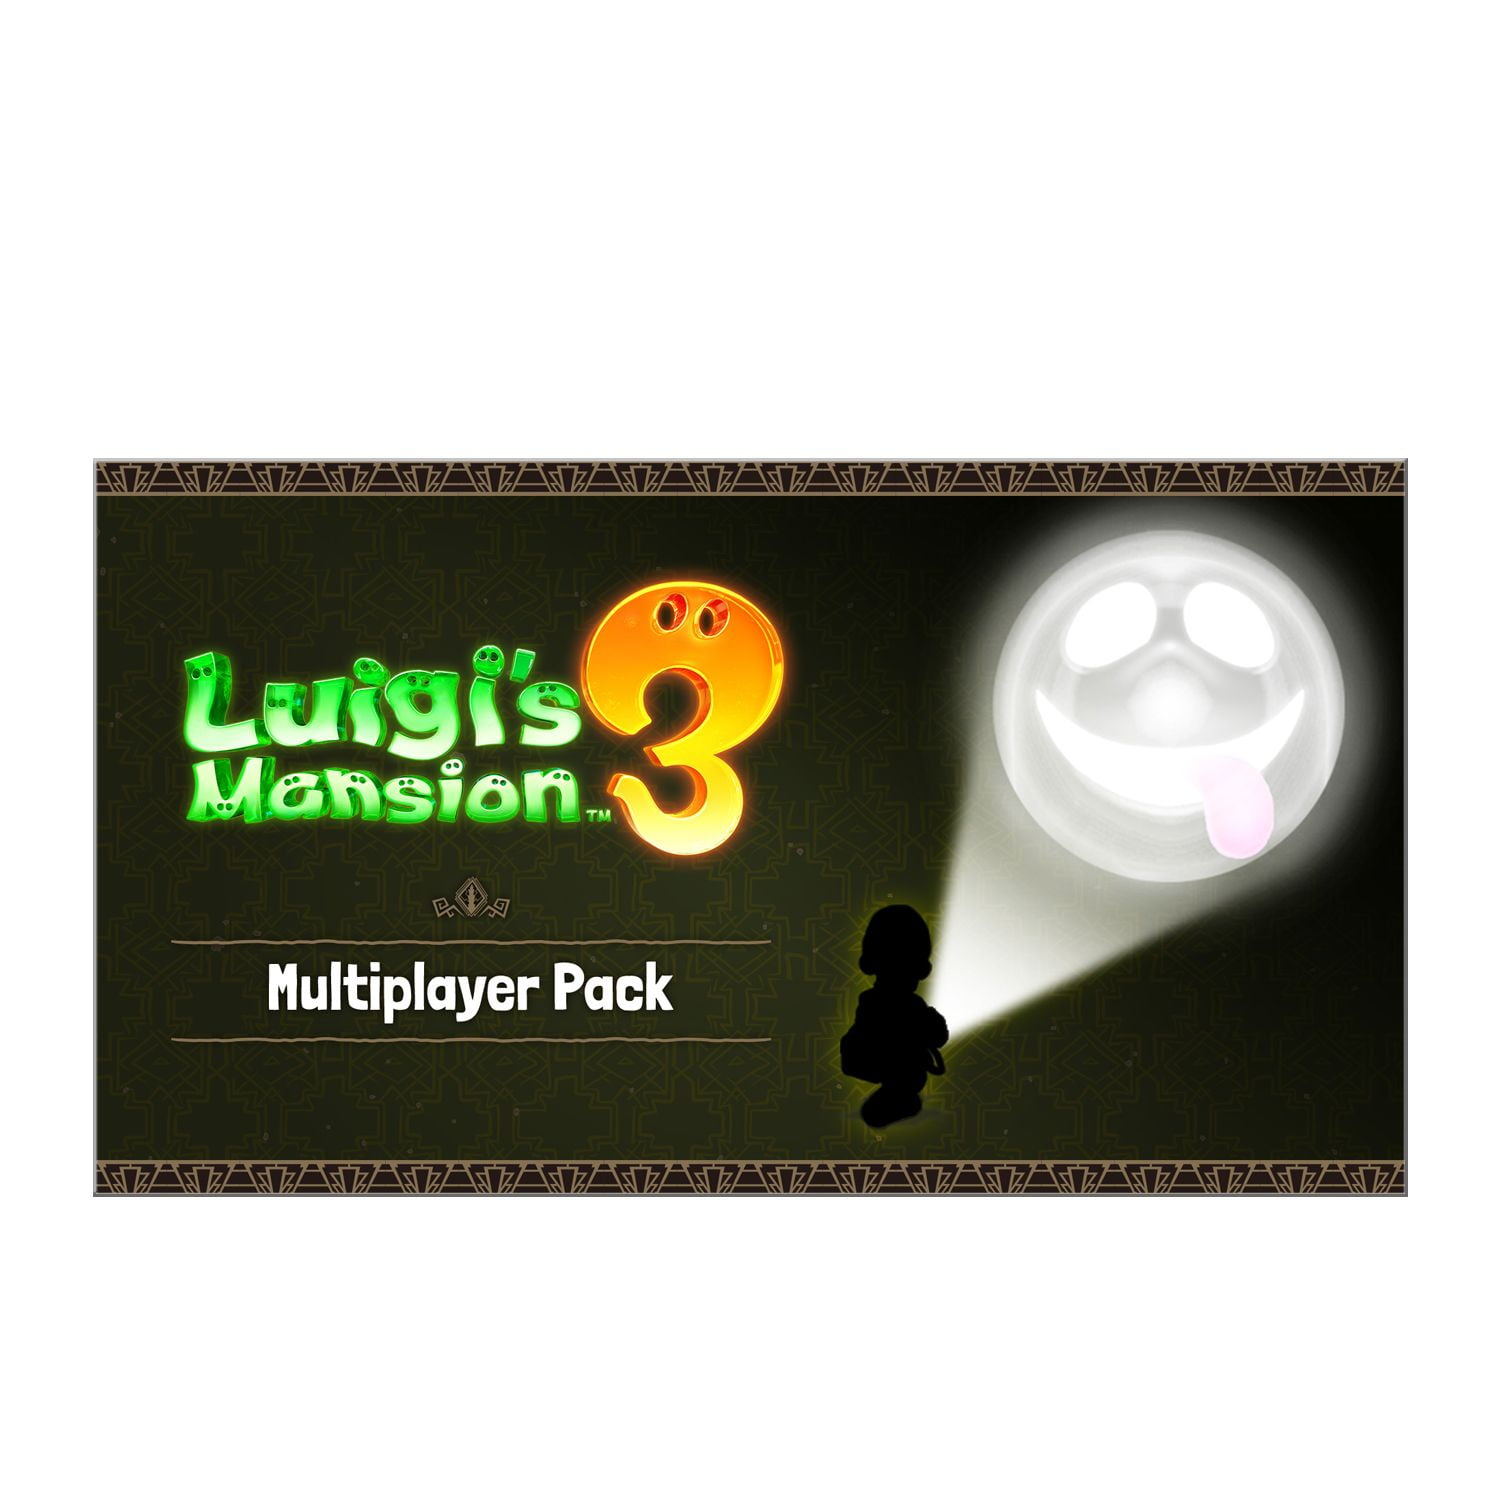 online multiplayer - Collection by sl33pyd0gc0w 